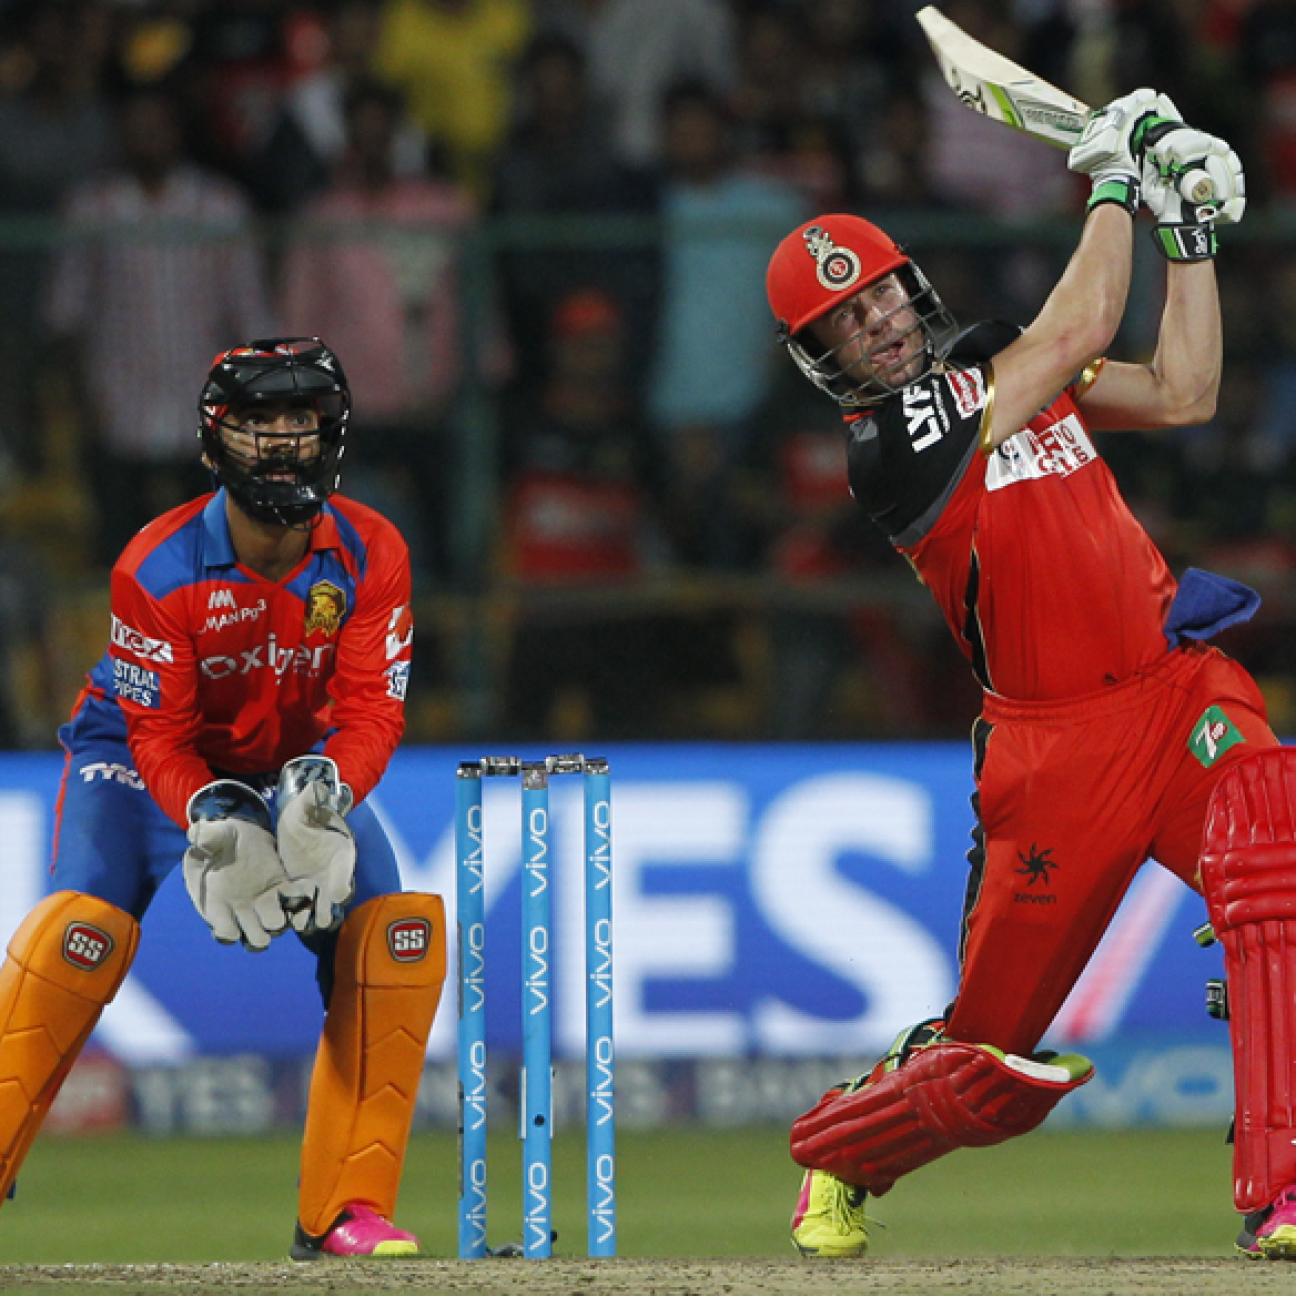 AB de Villiers of Royal Challengers Bangalore bats during match 57 (Qualifier 1) of the Vivo IPL ( Indian Premier League ) 2016 between the Gujarat Lions and the Royal Ch allengers Bangalore held at The M. Chinnaswamy Stadium in Bangalore, India, on the 24th May 2016 Photo by Deepak Malik / IPL/ SPORTZPICS